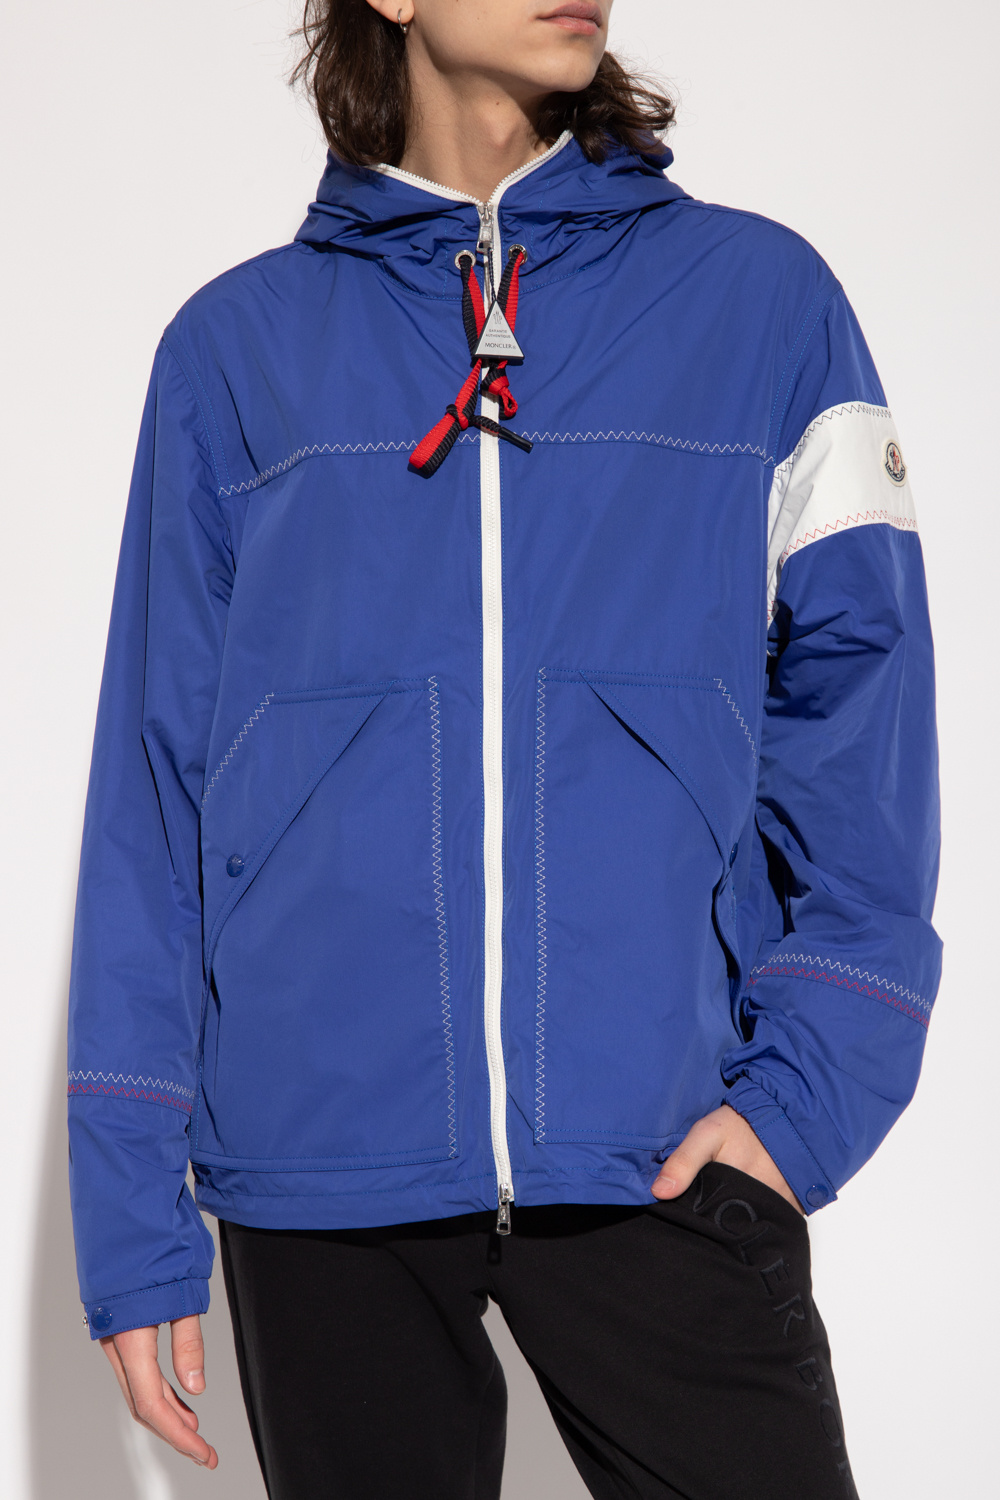 Moncler ‘Fujio’ for jacket with decorative seam